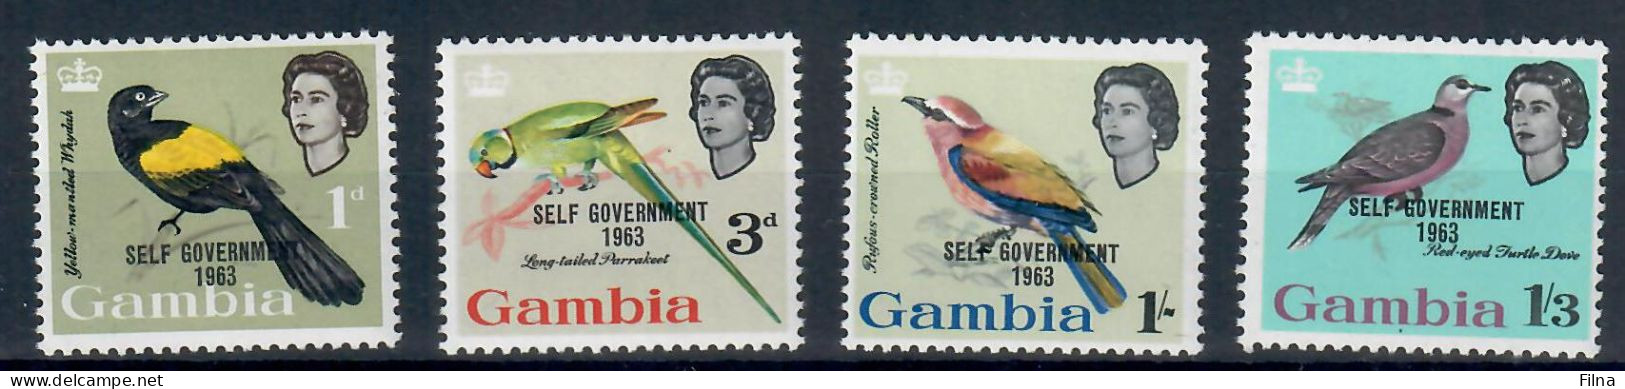 GAMBIA 1963 FAUNA  UCCELLI BIRDS OISEAUX SERIE COMPLETA OVERPRINTED SELF GOVERNMENT 1963  Mi.Nr.183/6  MNH/** - Gambia (1965-...)